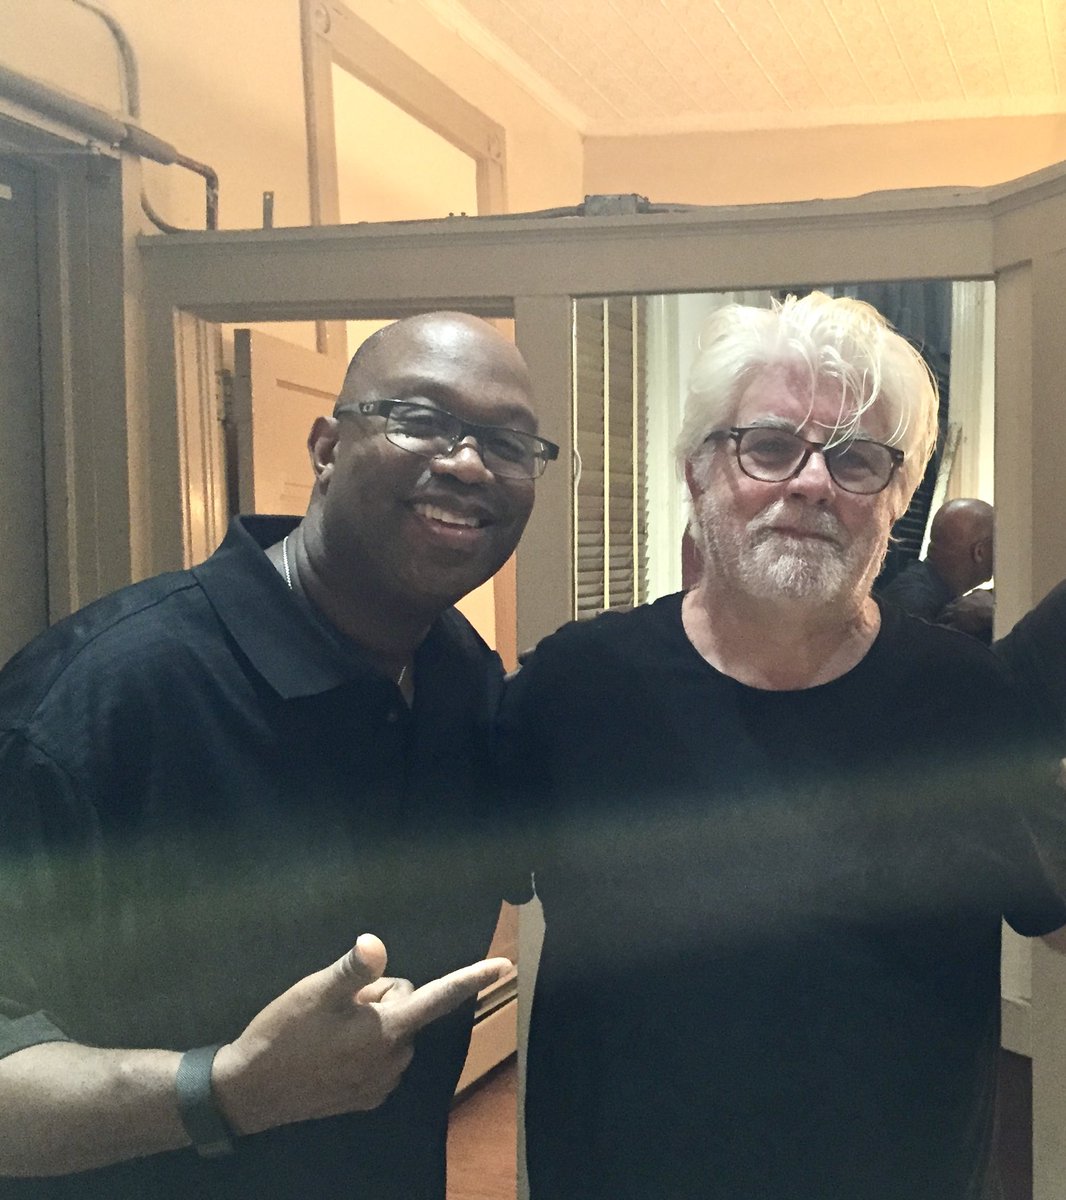 #TBT A pleasure to meet the incredible Pop/R&B singer #MichaelMcDonald after his show. #MinuteByMinute #IKeepForgetting